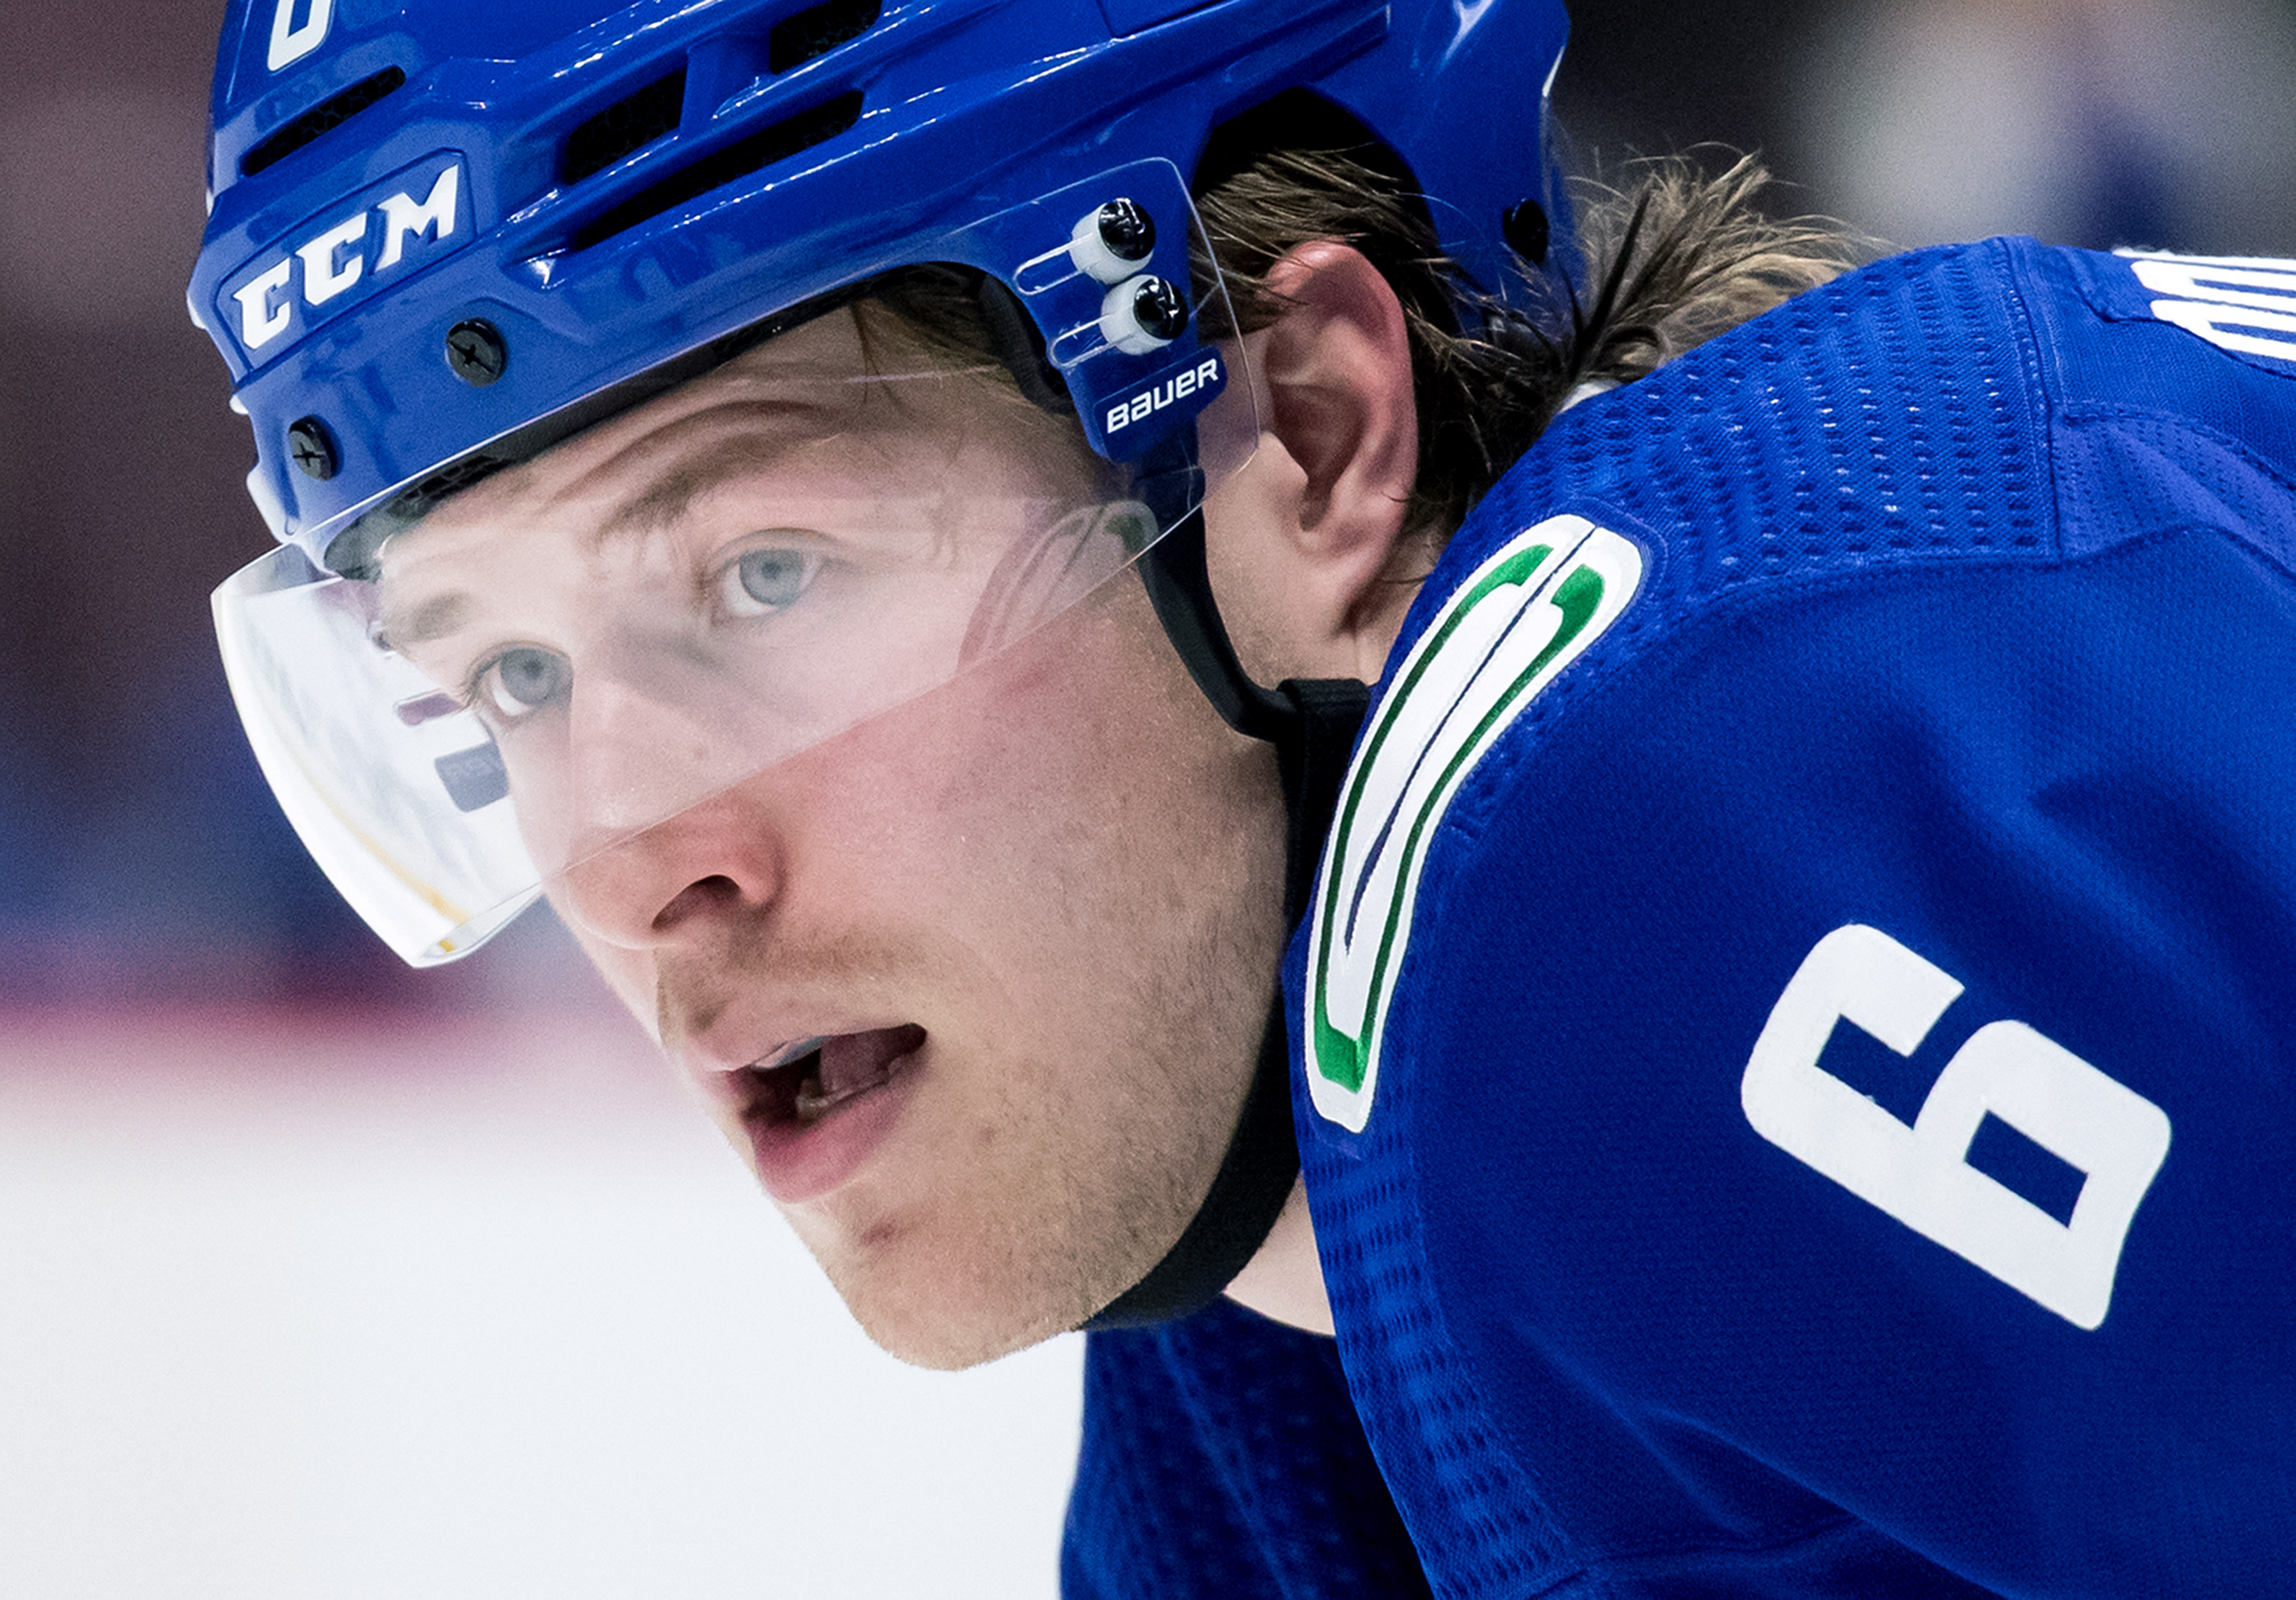 Vancouver Canucks: Brock Boeser 2023 - Officially Licensed NHL Removab in  2023